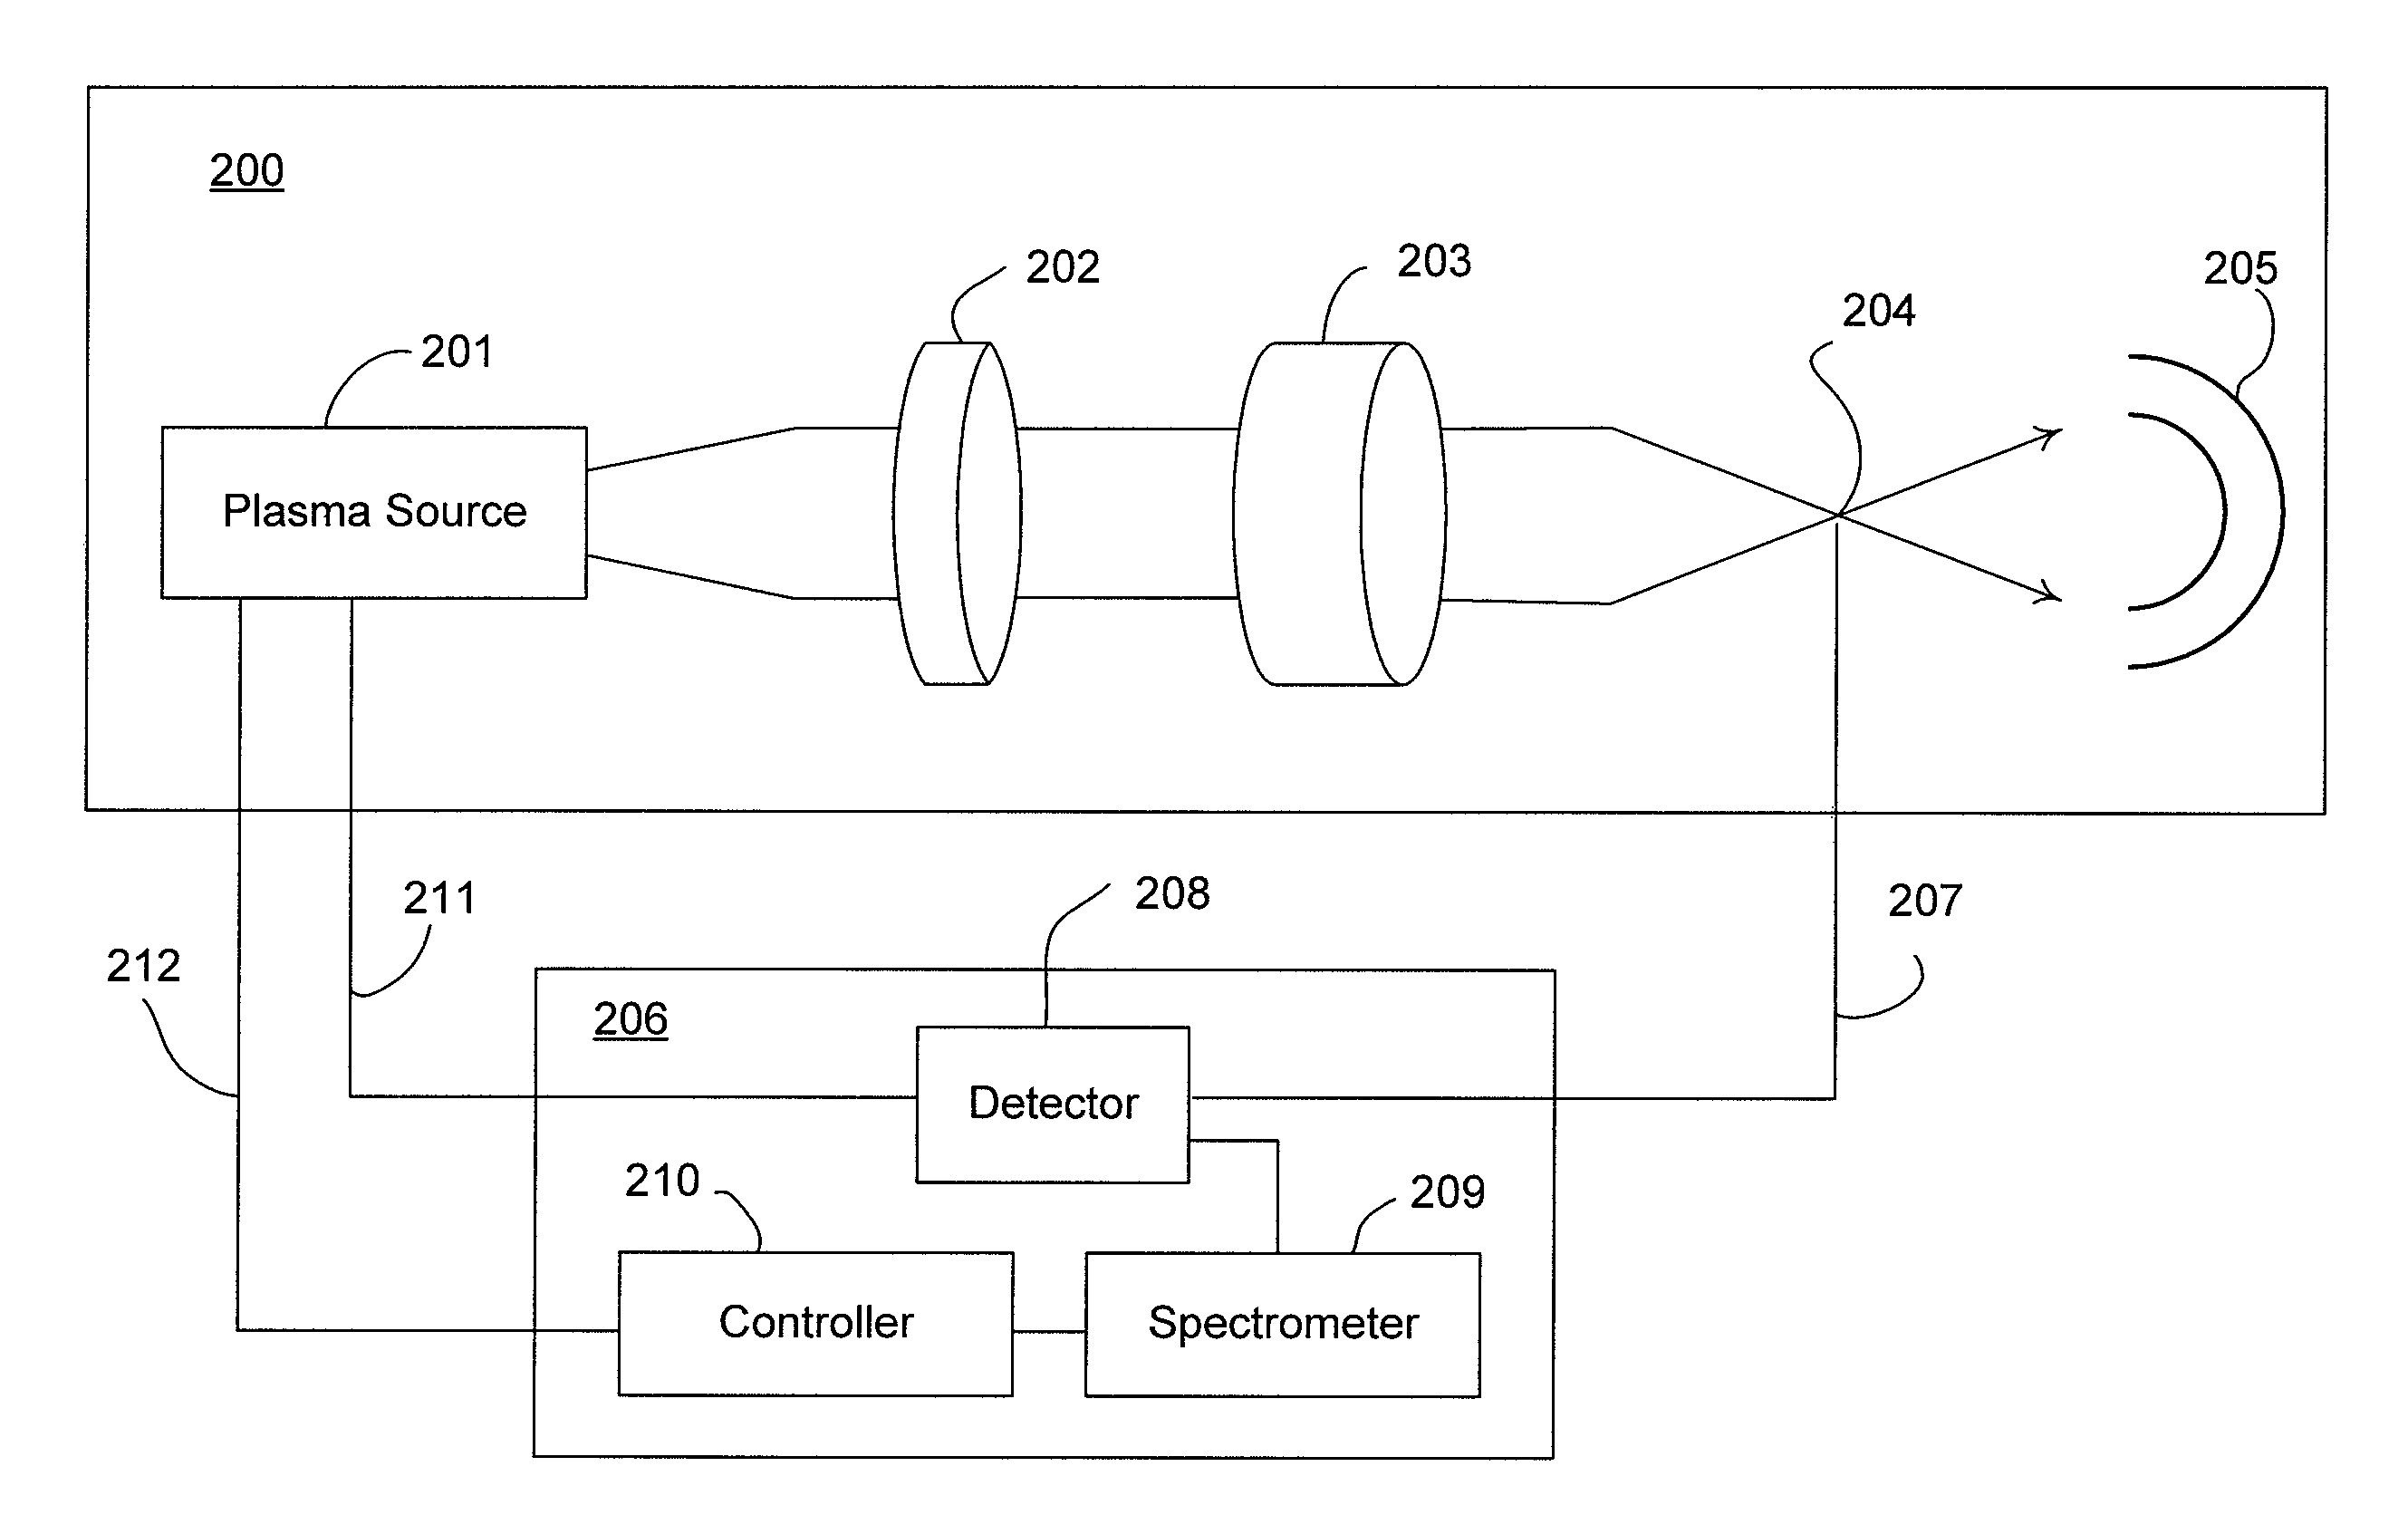 Systems and methods for monitoring and controlling the operation of extreme ultraviolet (EUV) light sources used in semiconductor fabrication